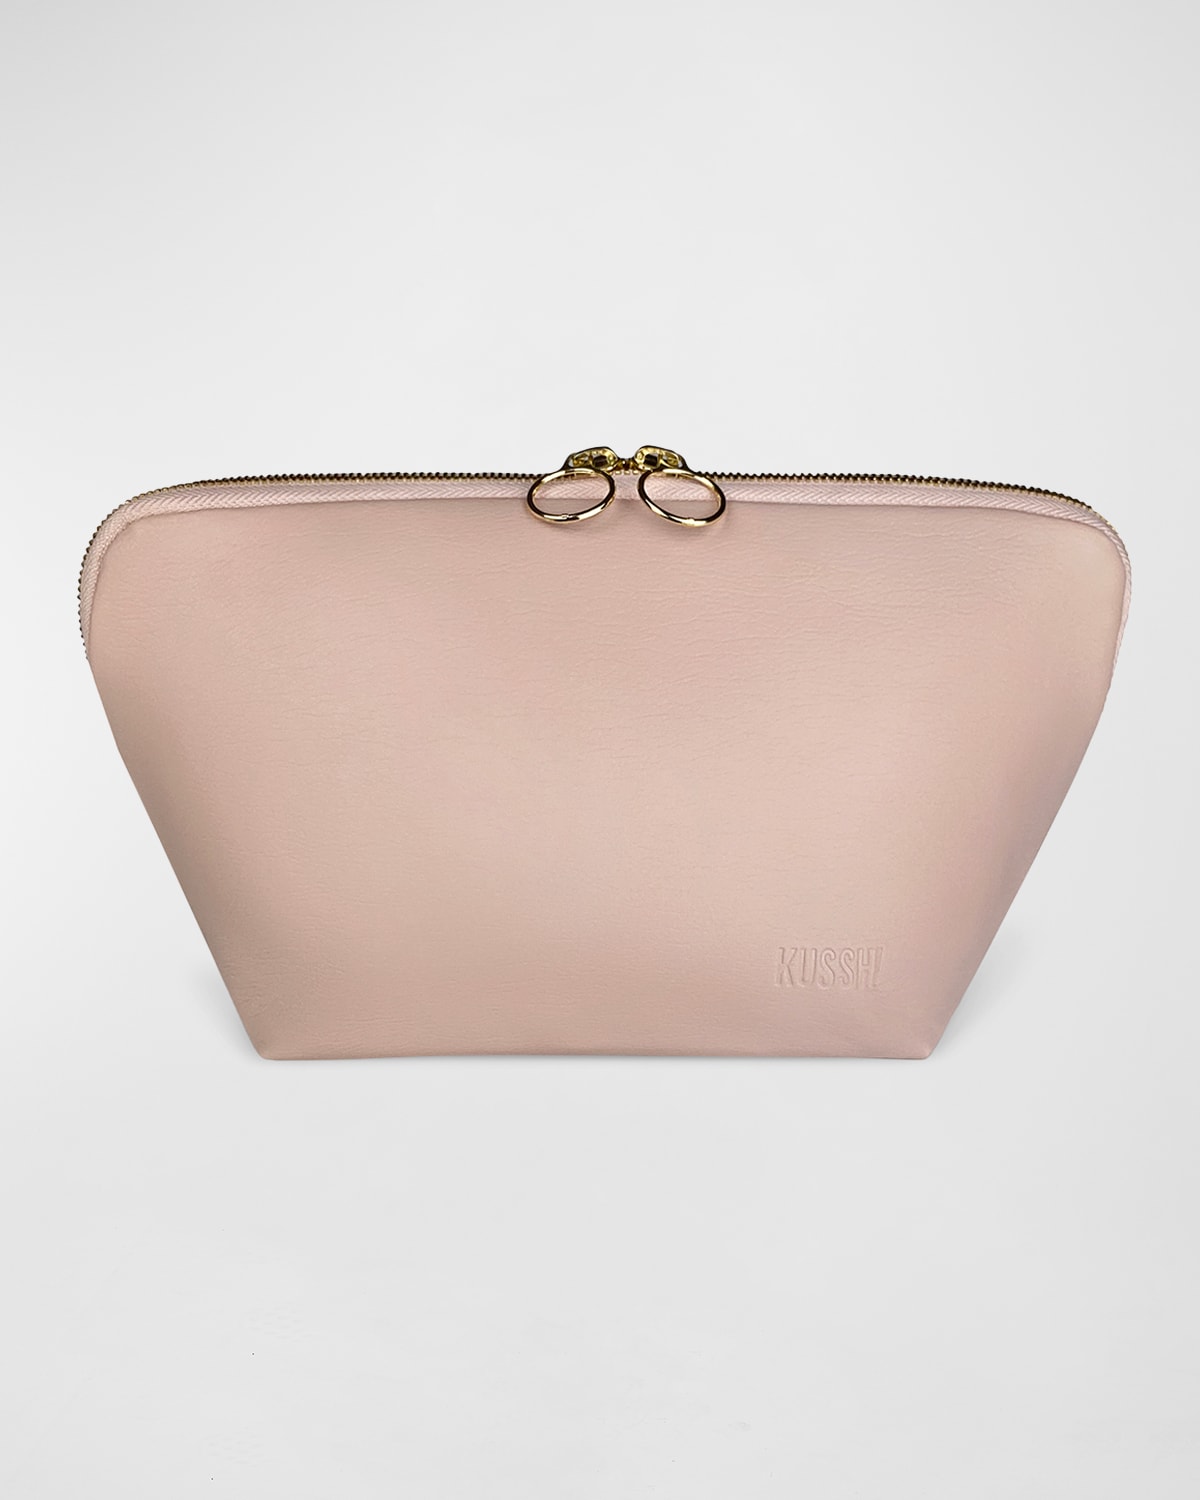 Kusshi Signature Leather Makeup Bag In Blush /cool Grey